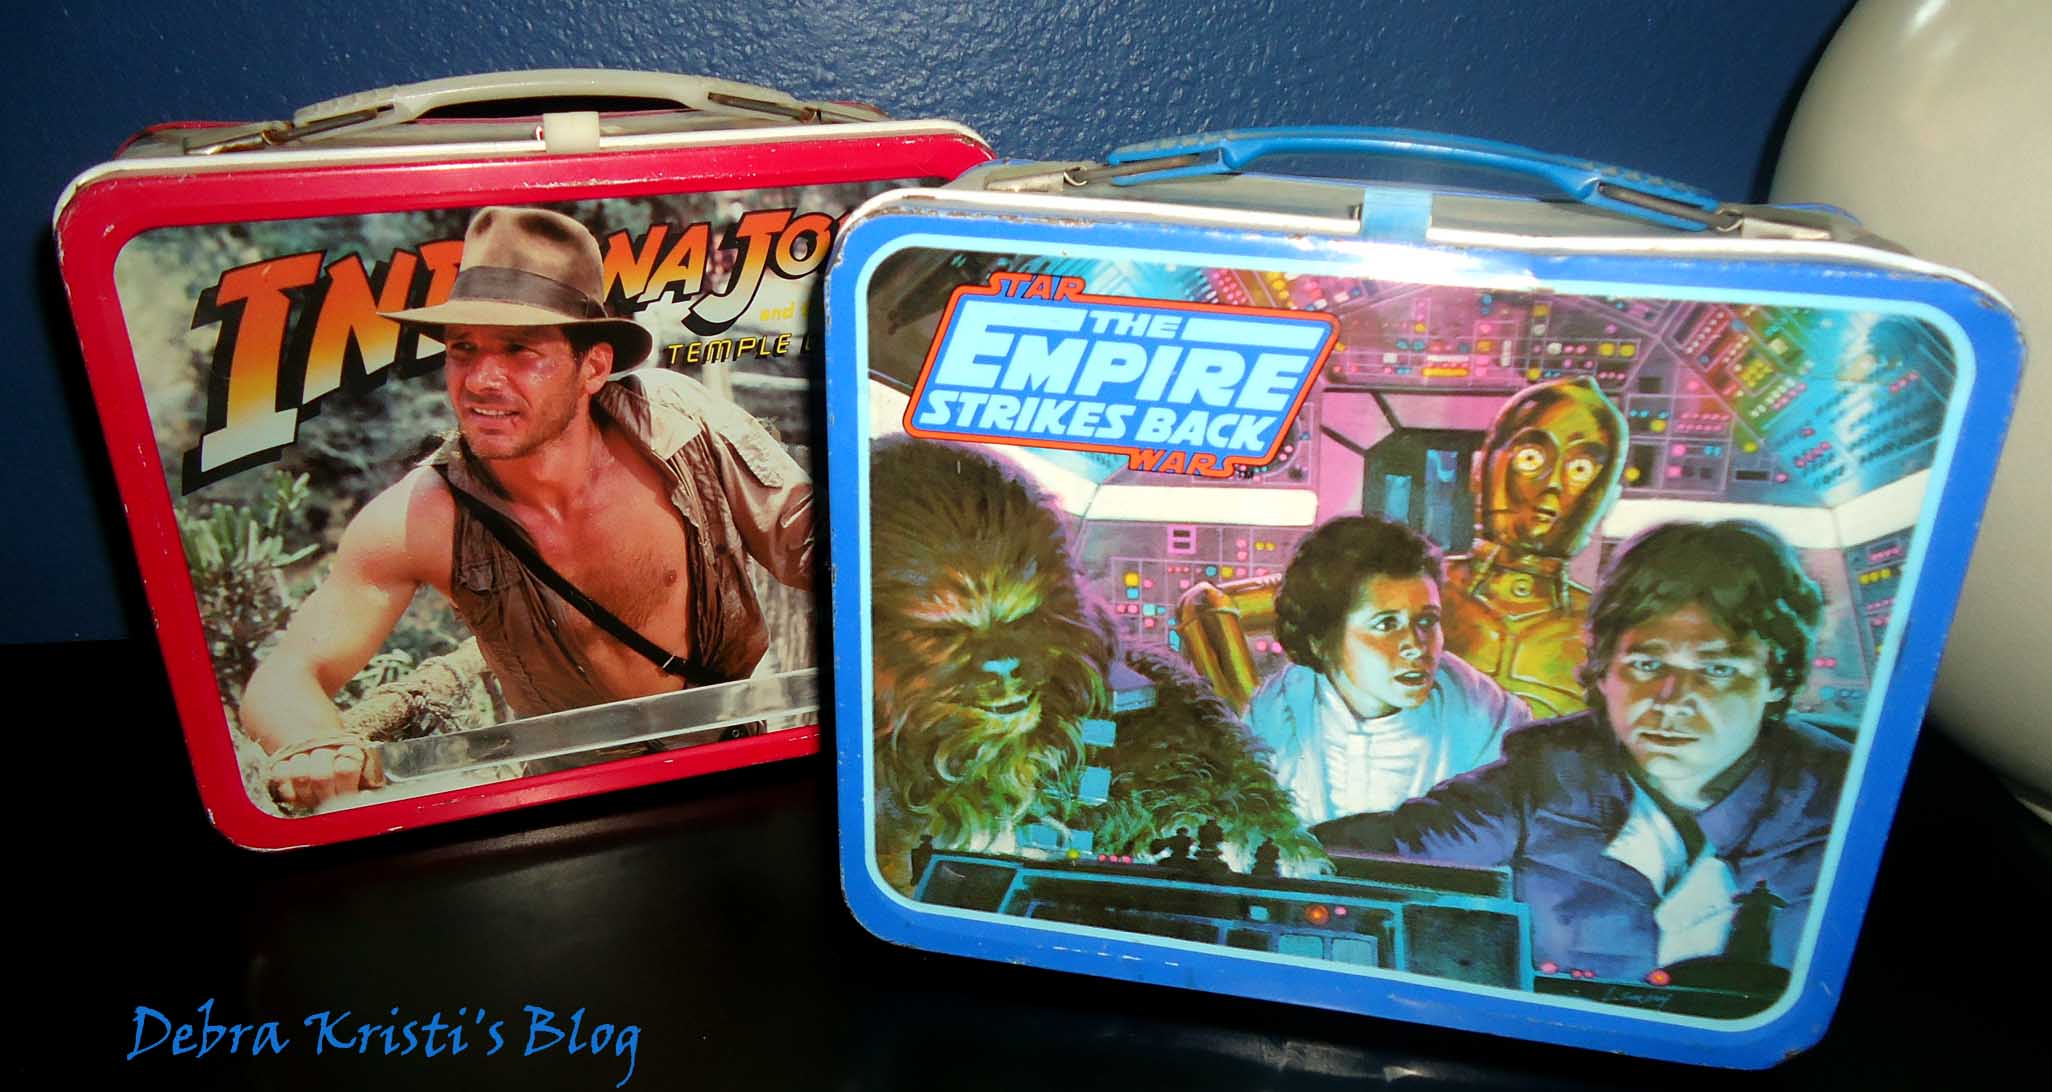 Metal lunch boxes. Like Gucci handbags for women, these were the talk of lunch time. Back in the old days, parents packed lunches and cared about their kids. Now they eat government slop, and everyone complains about it.